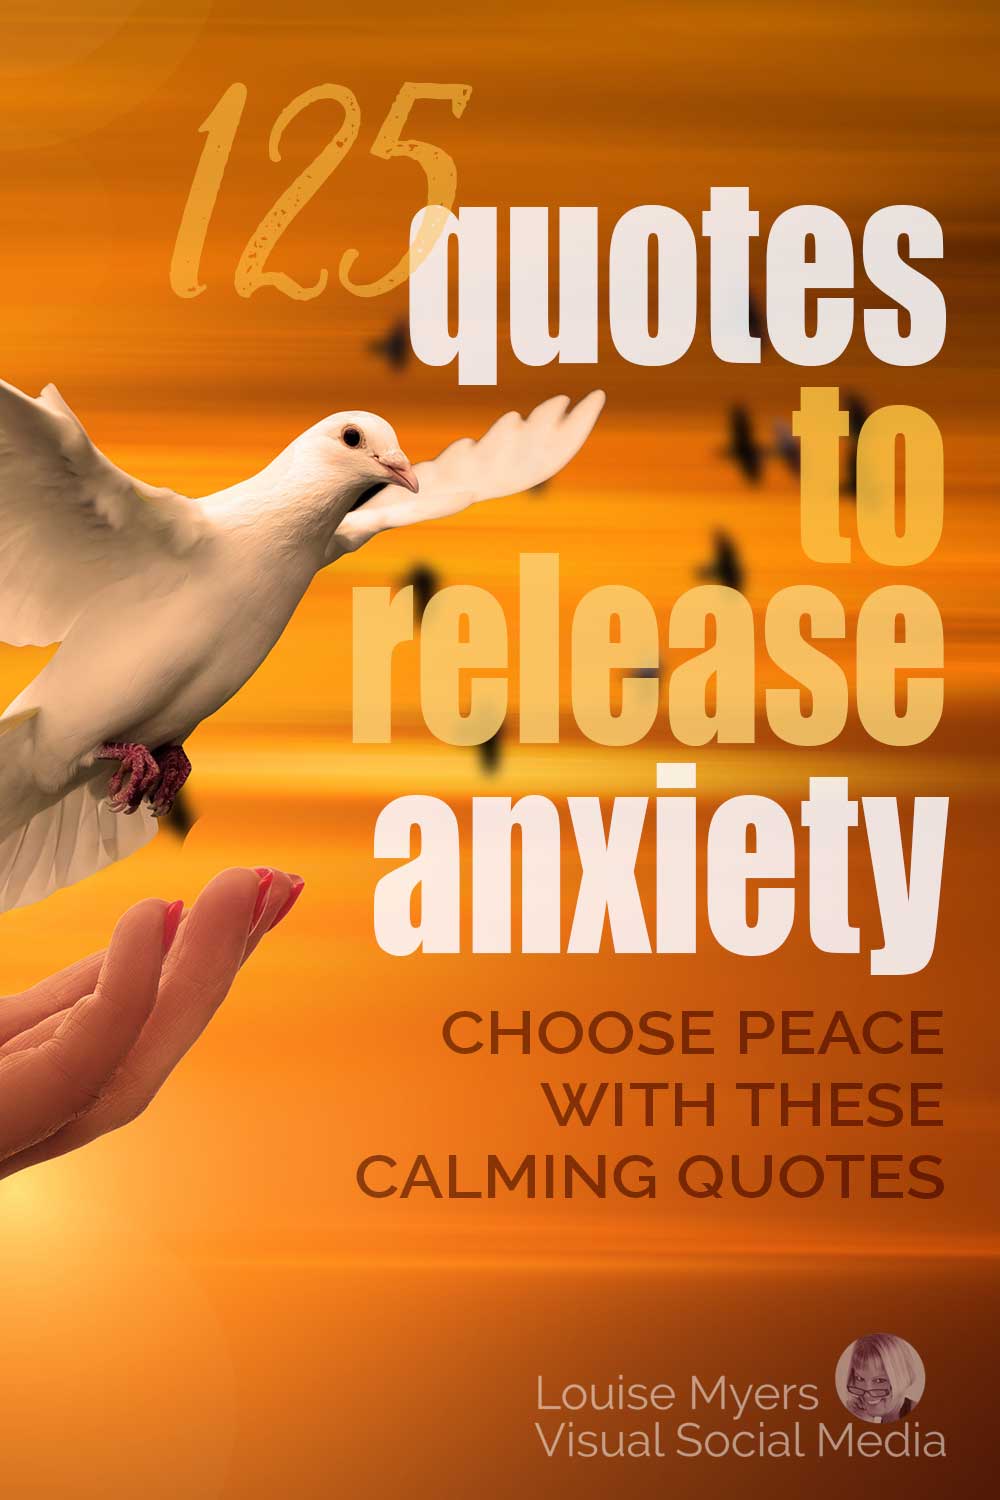 white dove flies from hands with words saying 125 quotes to release anxiety.